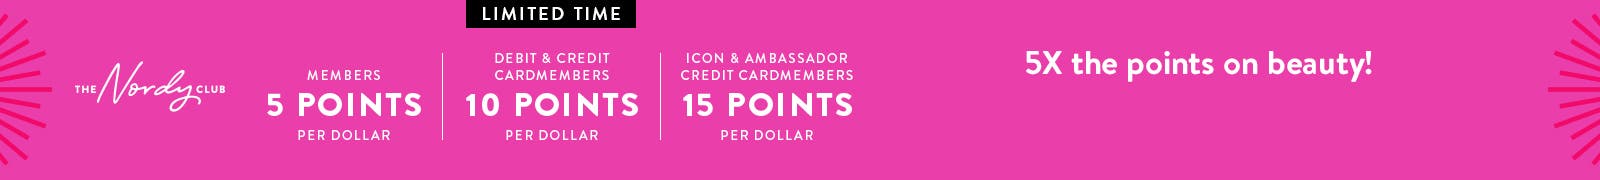 Five times the points on beauty for a limited time! Members earn 5 points per dollar, debit and credit cardmembers earn 10, Icon and Ambassador credit cardmembers earn 15 points per dollar.